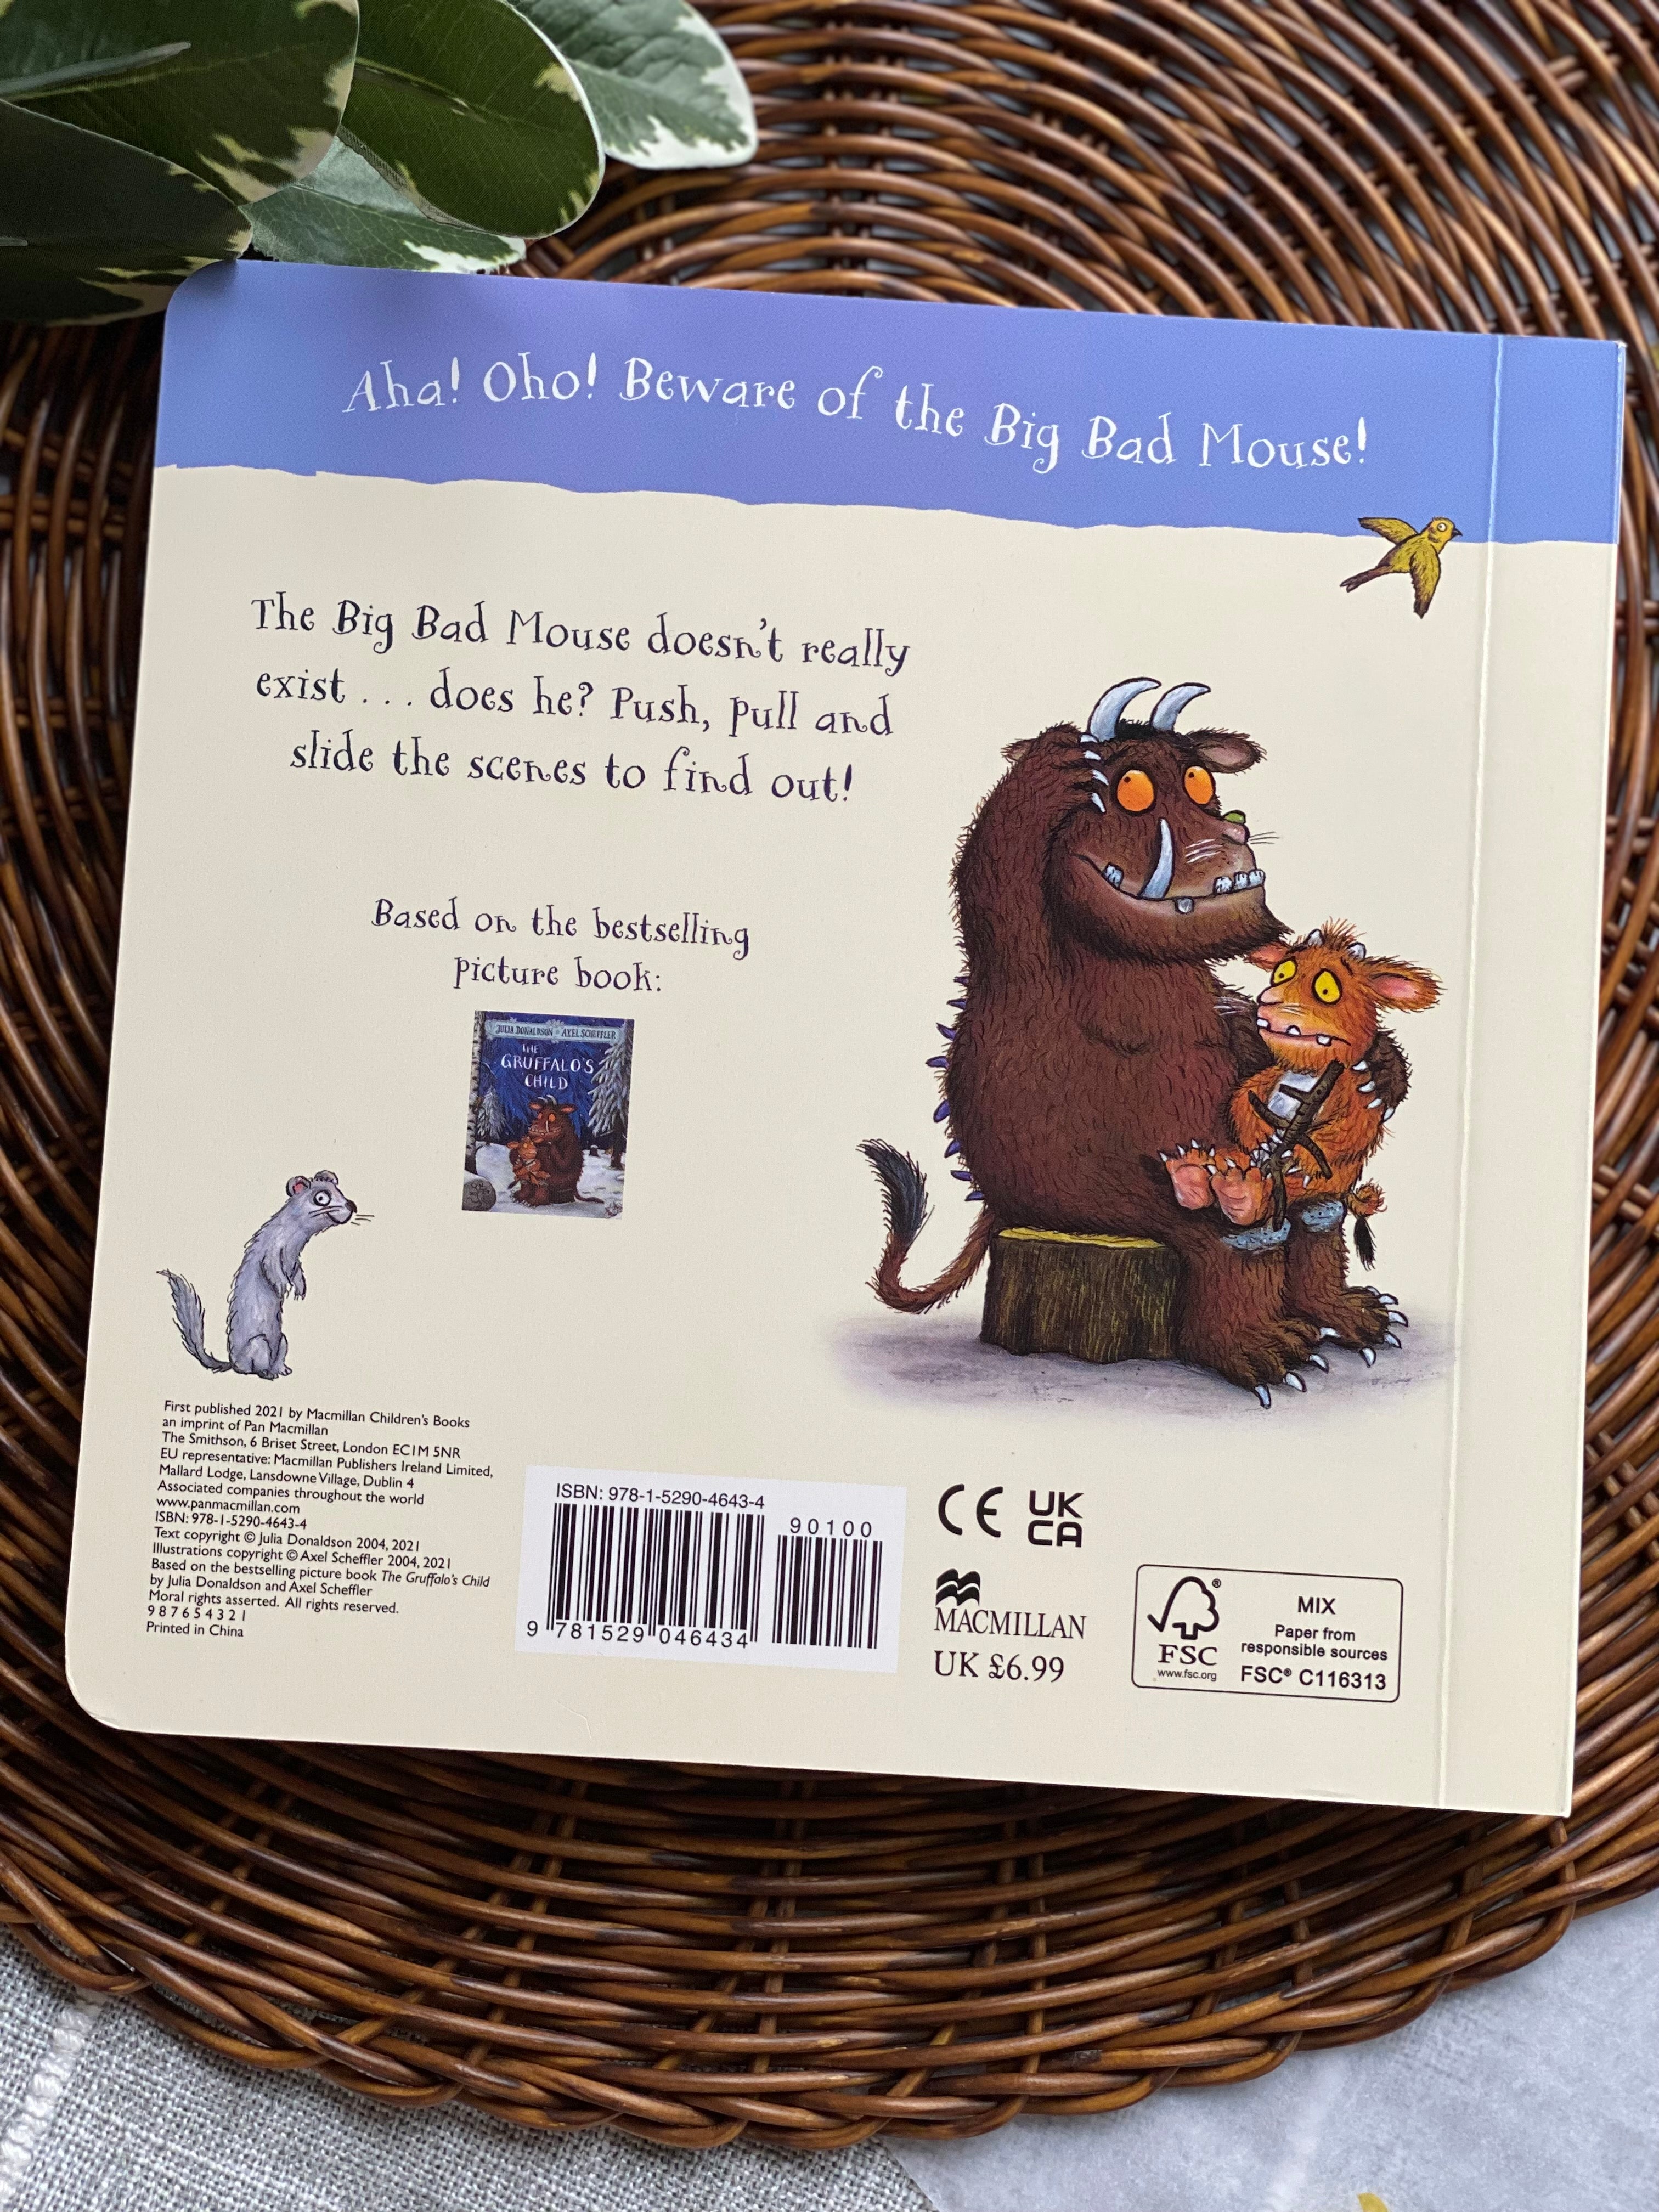 The GRUFFALO'S CHILD: A Push, Pull and Slide Book